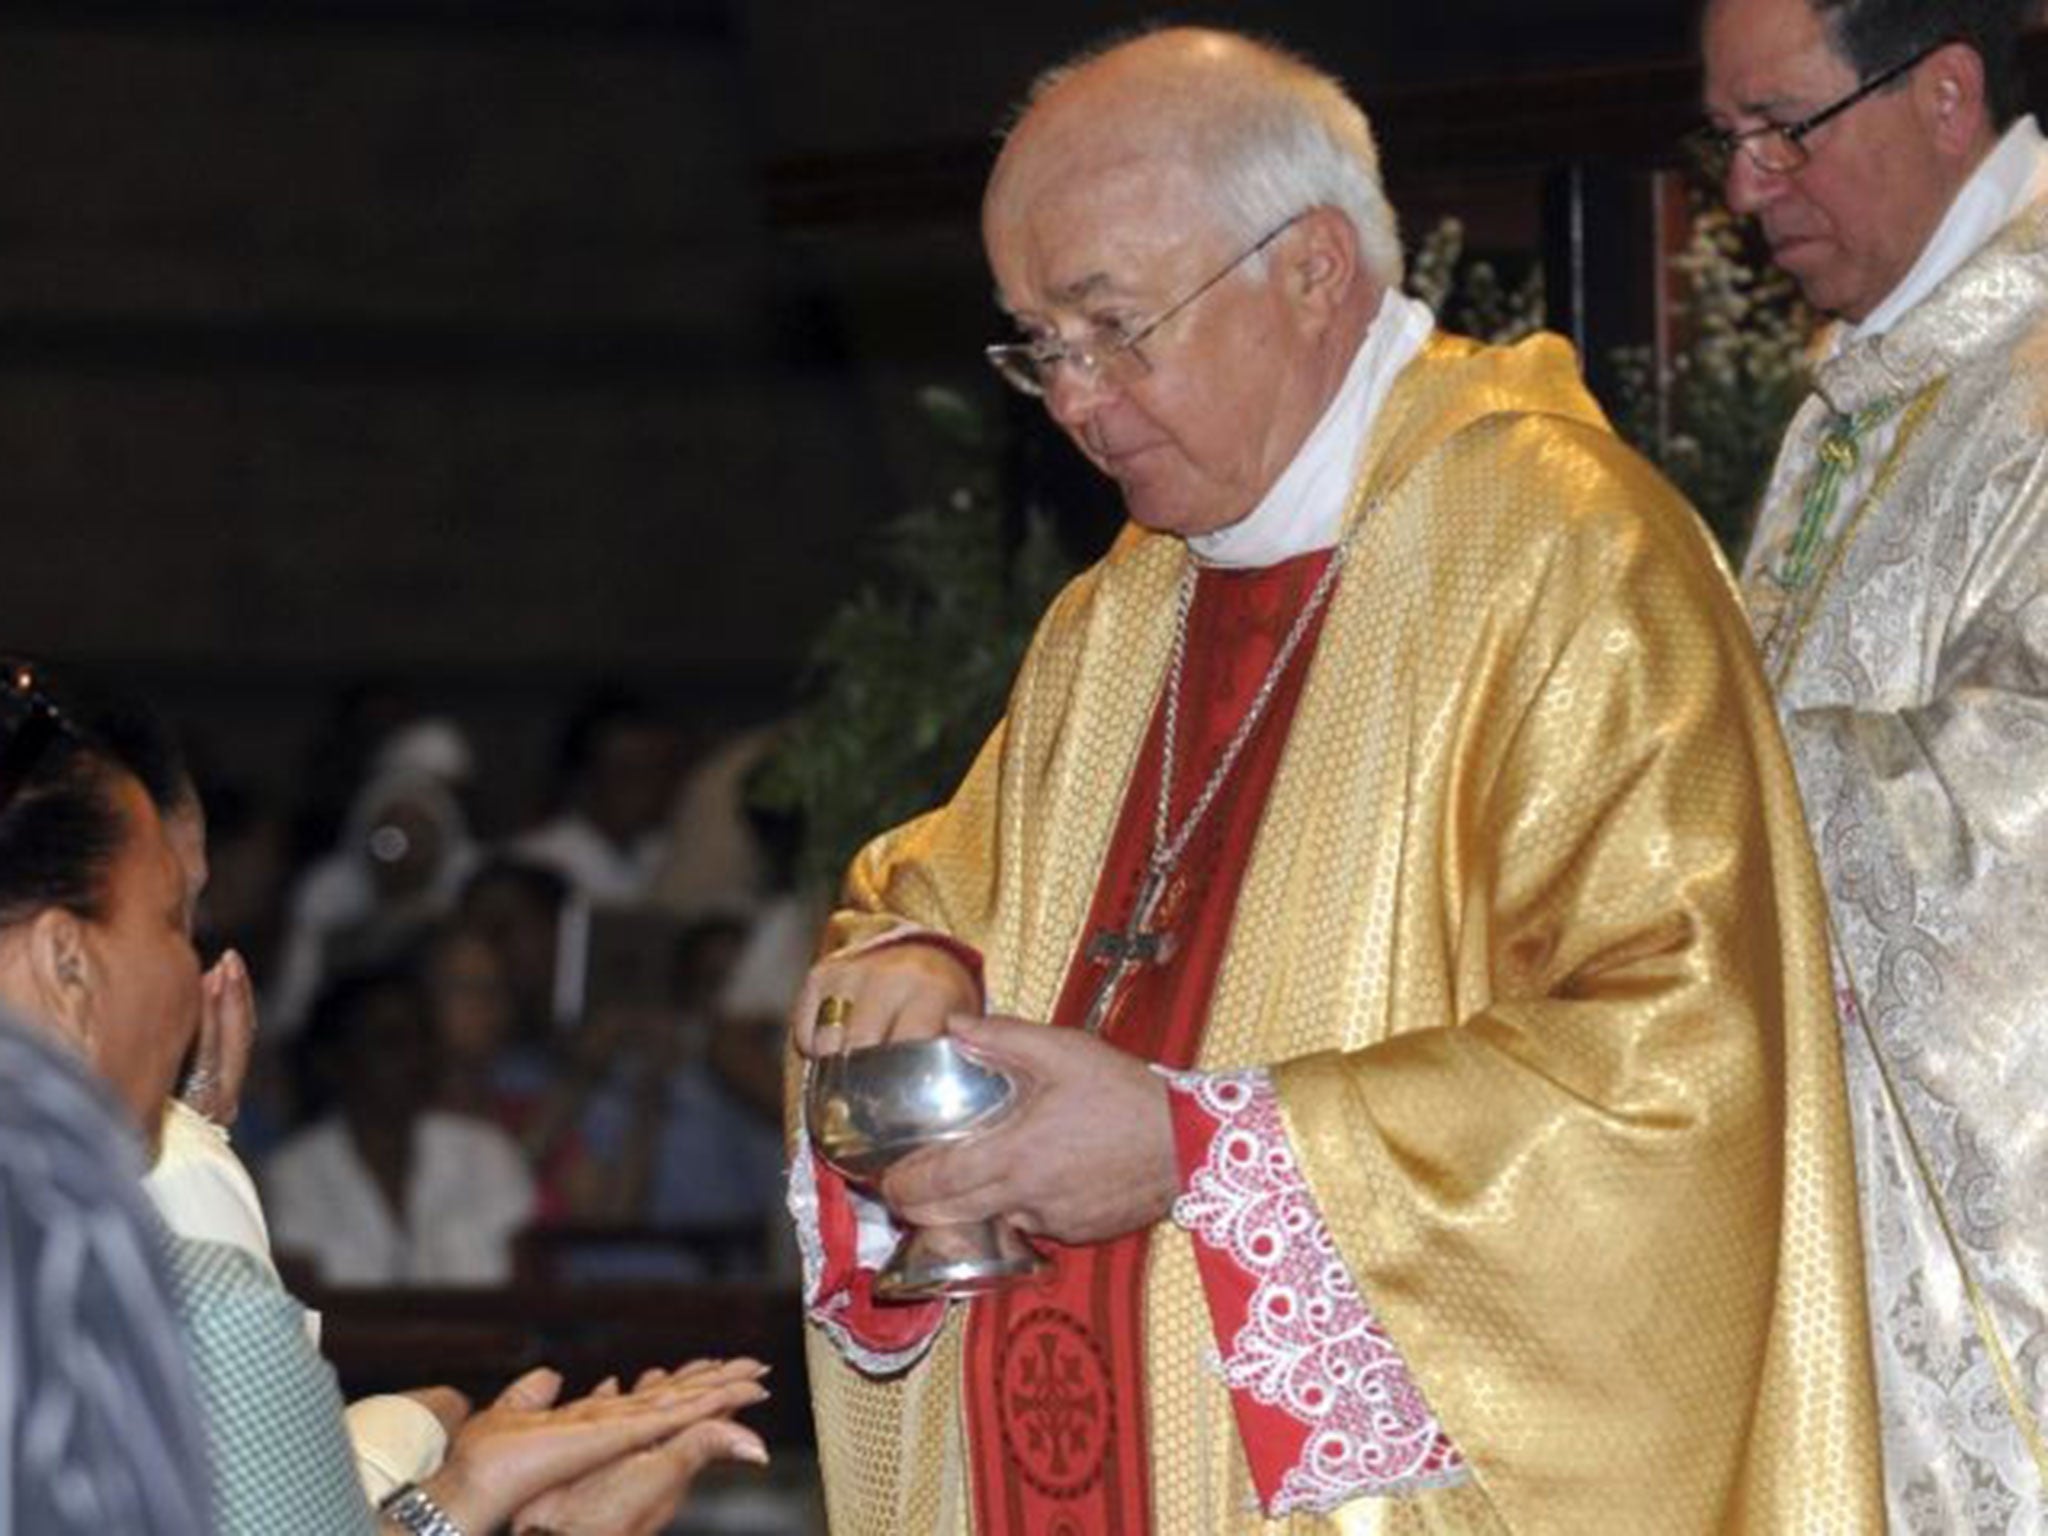 Archbishop Josef Wesolowski, papal nuncio for the Dominican Republic, leads a Mass in Santo Domingo, Dominican Republic. Wesolowski has been convicted by a church tribunal of sex abuse and has been defrocked, the first such sentence handed down against a